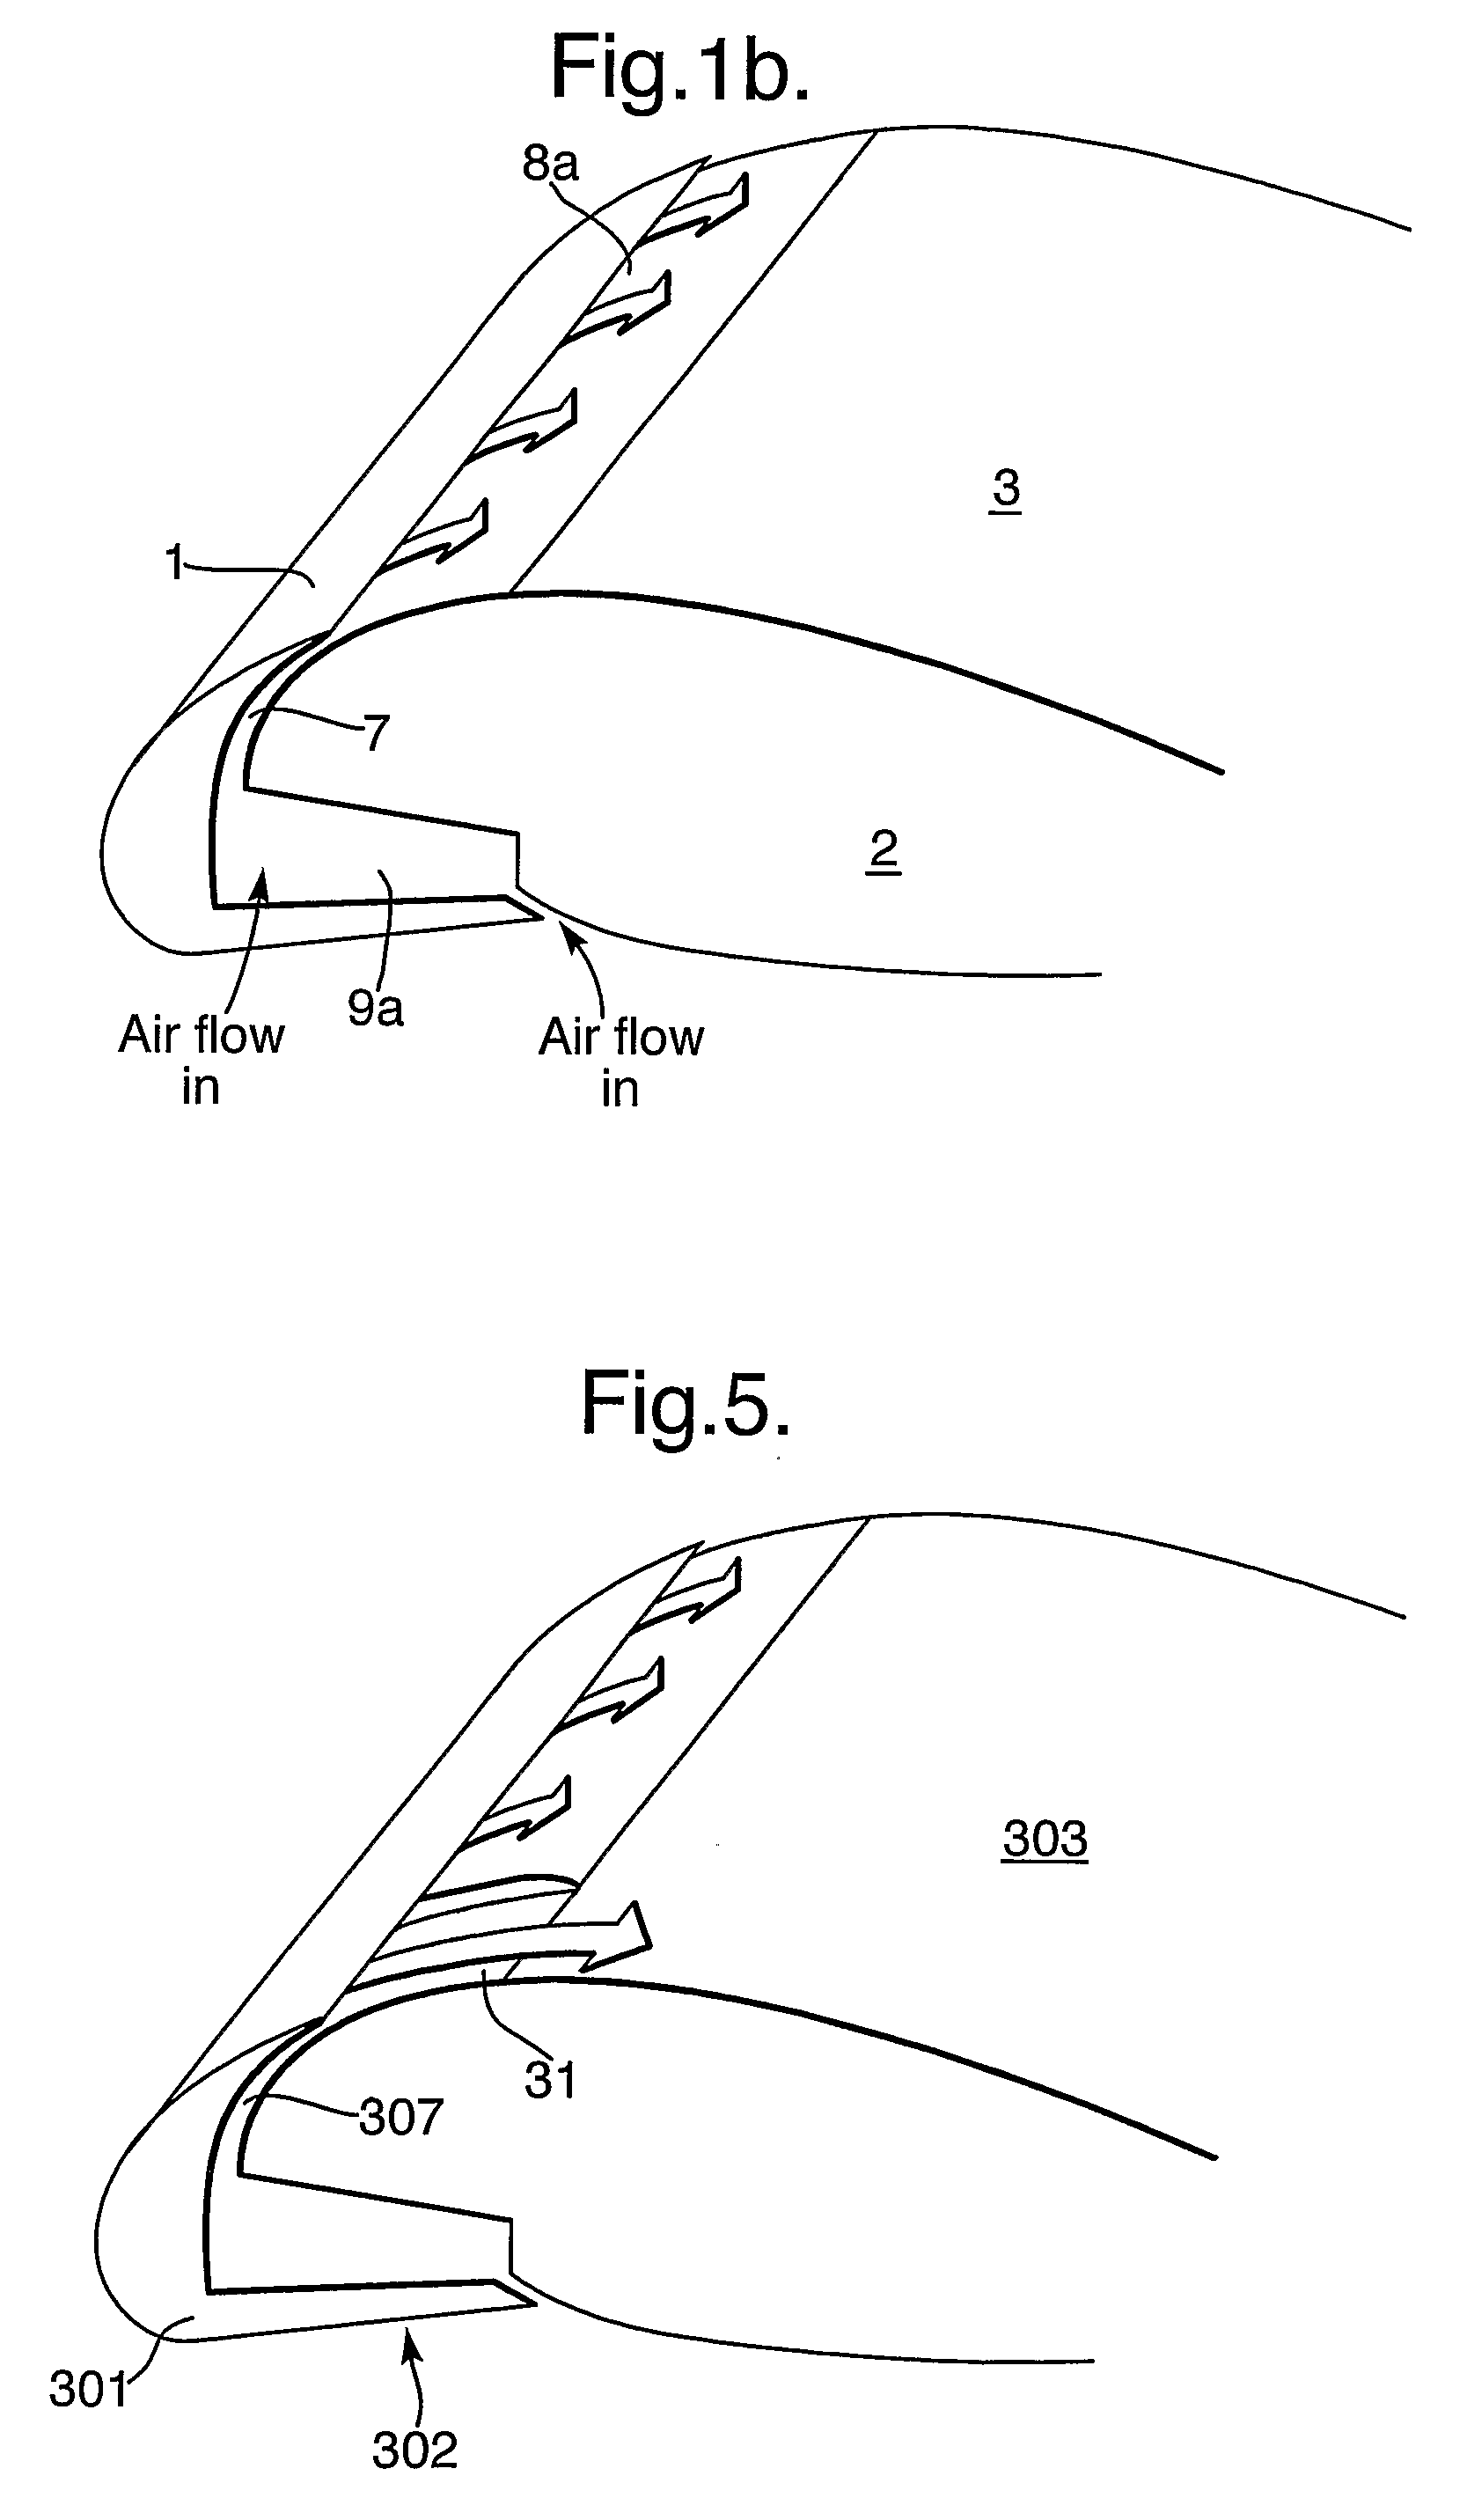 High-lift device for an aircraft